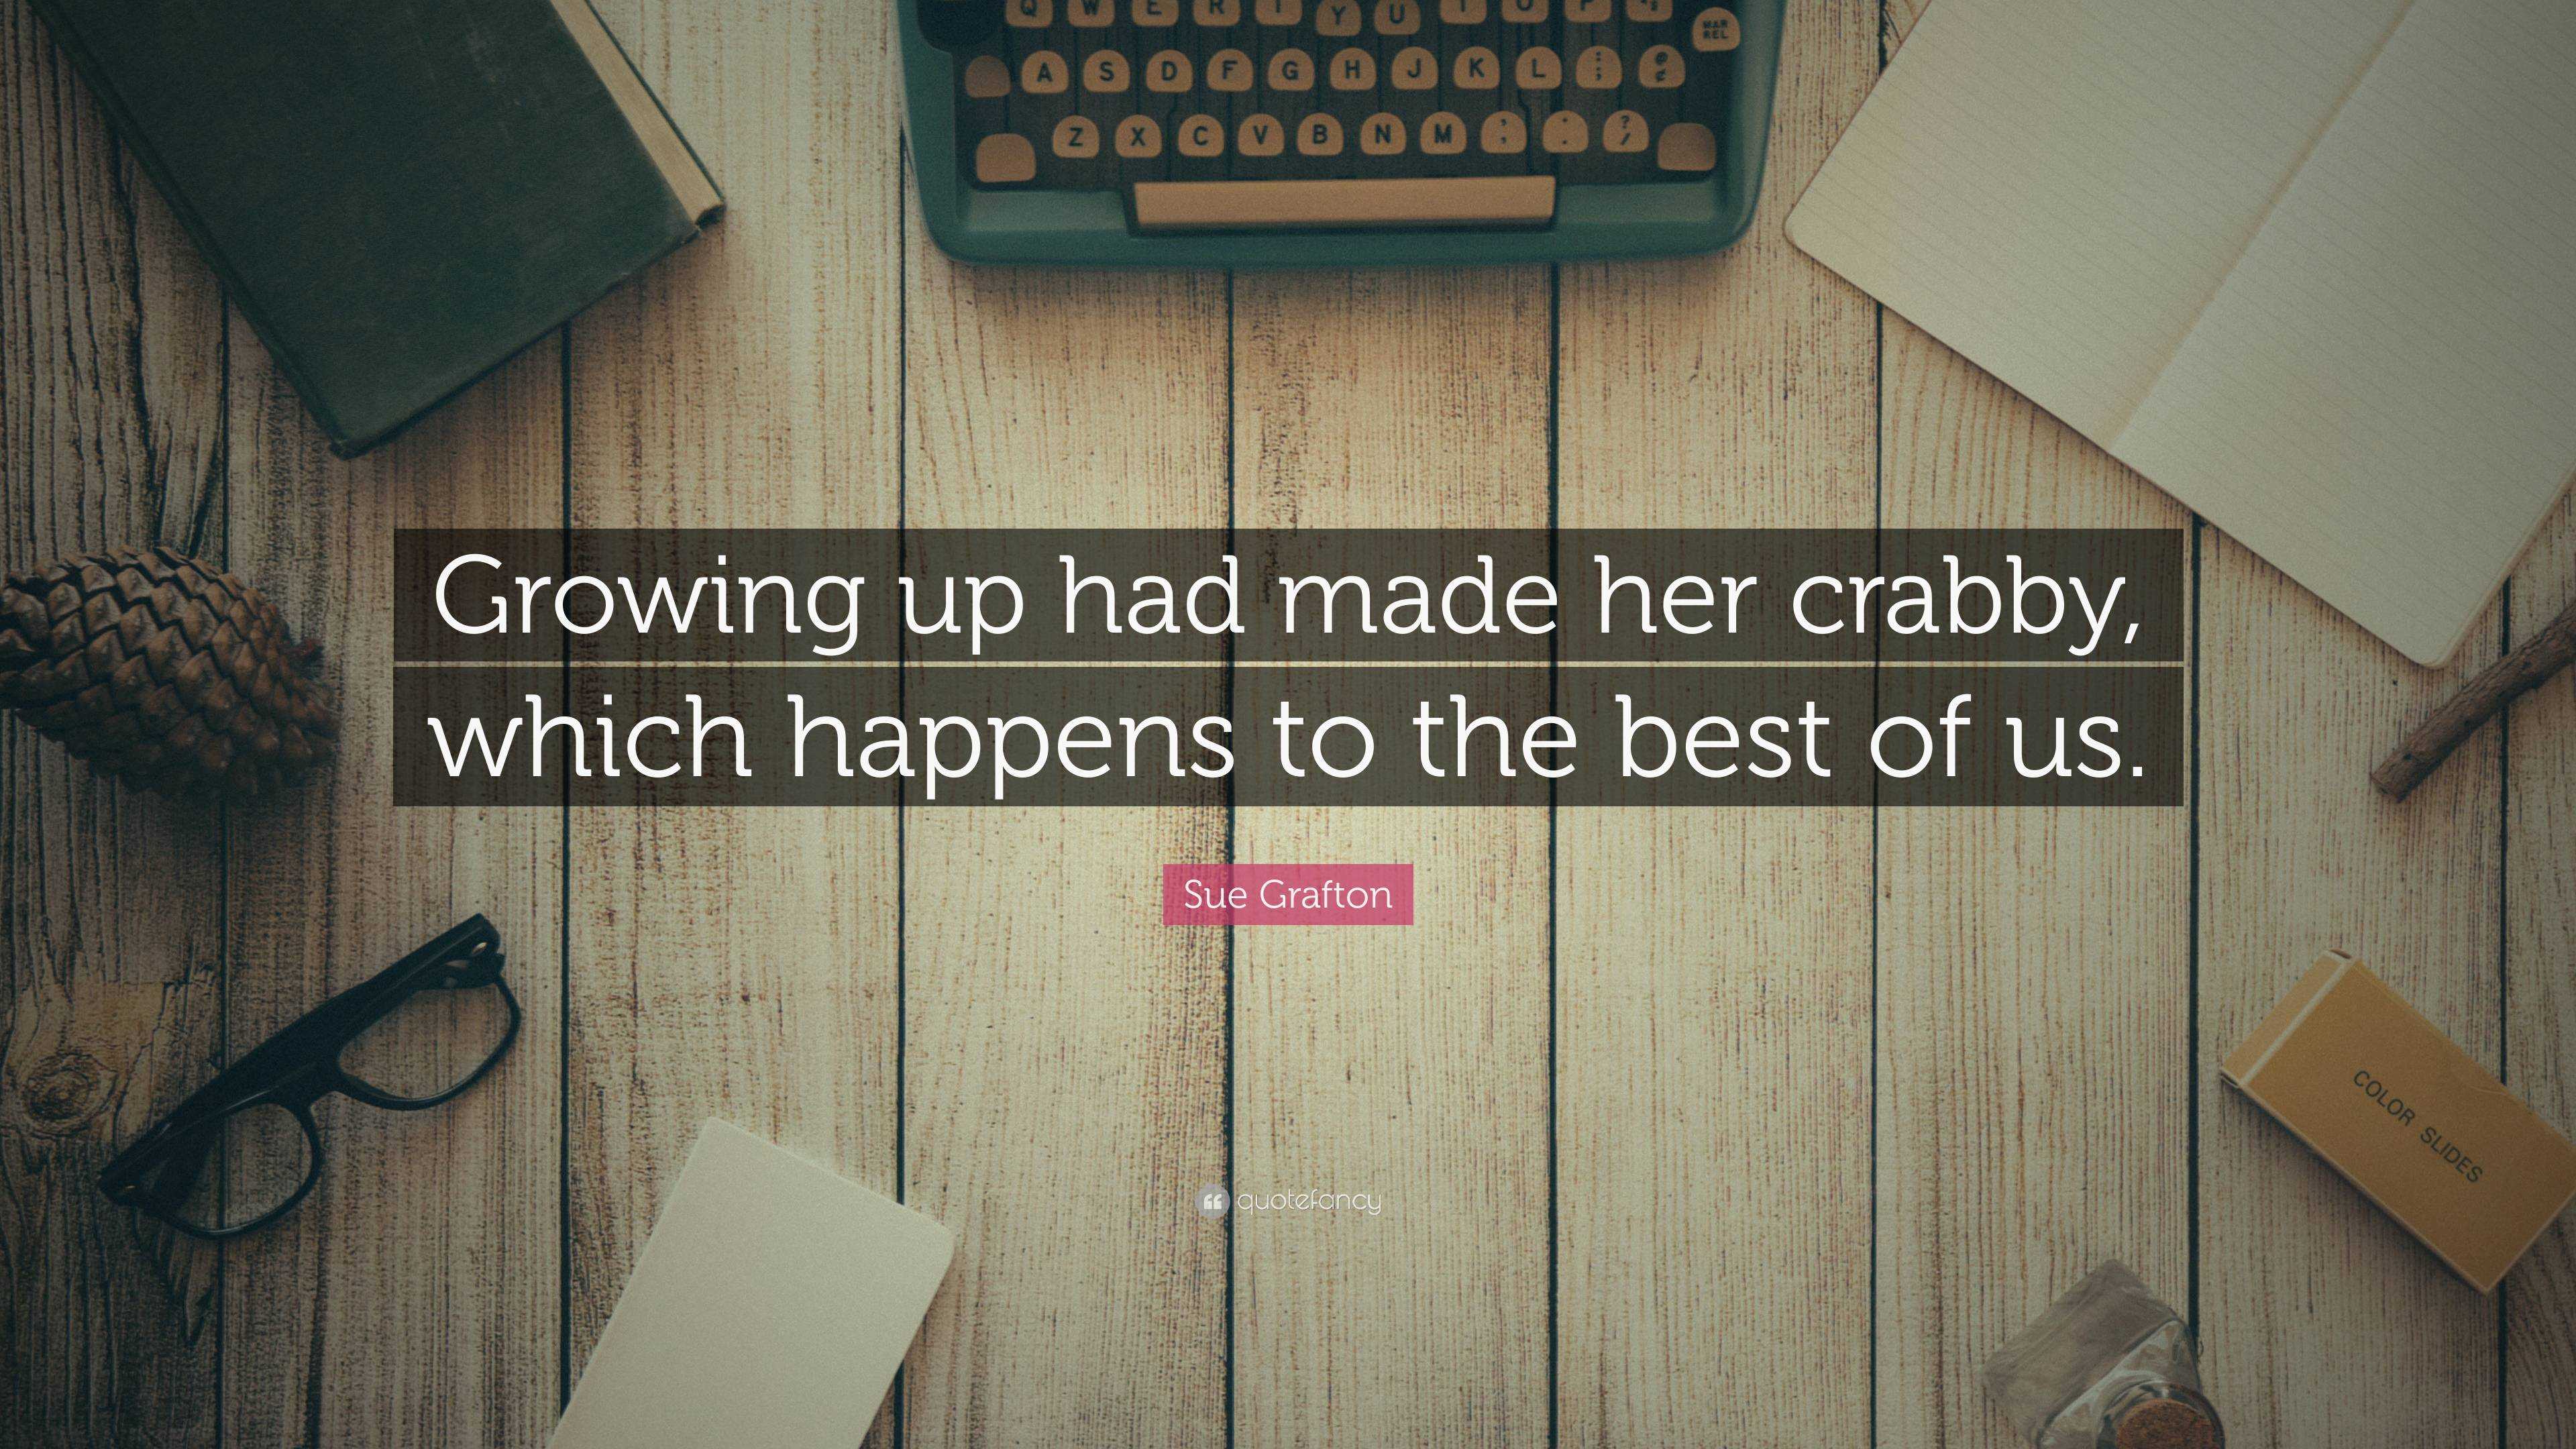 https://quotefancy.com/media/wallpaper/3840x2160/6640919-Sue-Grafton-Quote-Growing-up-had-made-her-crabby-which-happens-to.jpg